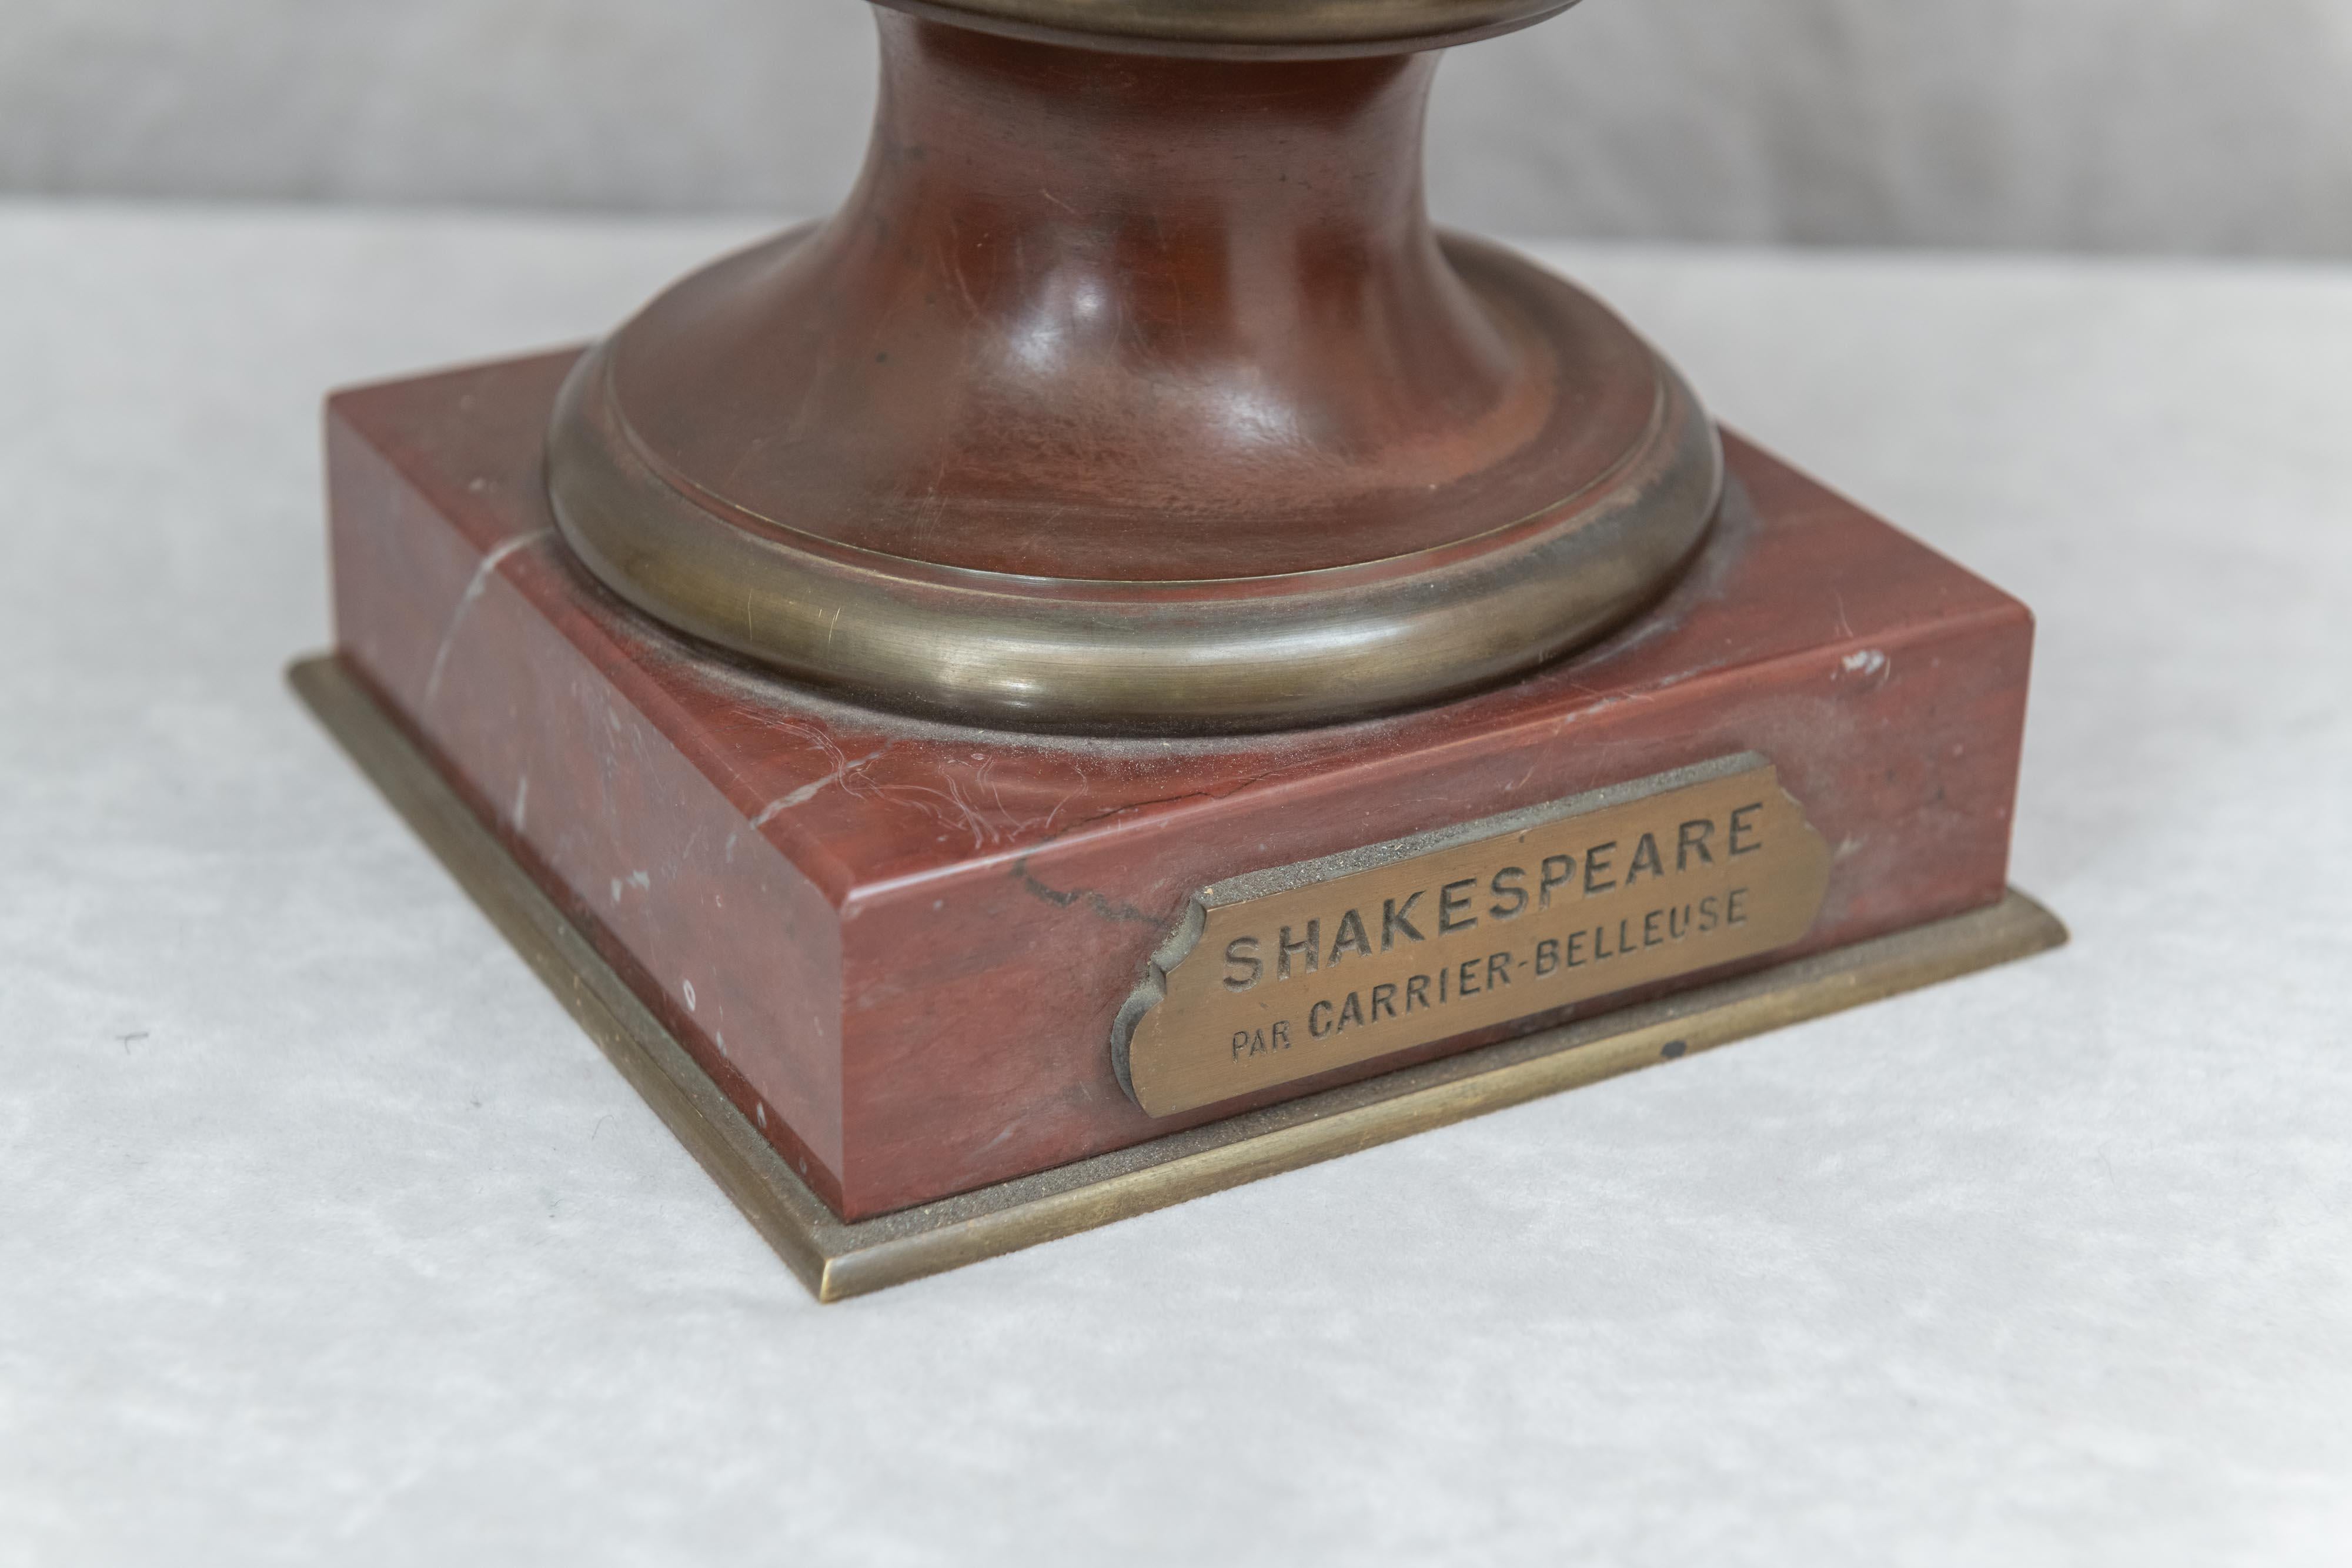 The exceptional large bust of Wm. Shakespeare is as detailed and life like as any bronze bust can be executed. If you just look at his forehead you will see how finely sculpted and cast this bronze was done. Enhanced by a rich warm reddish brown